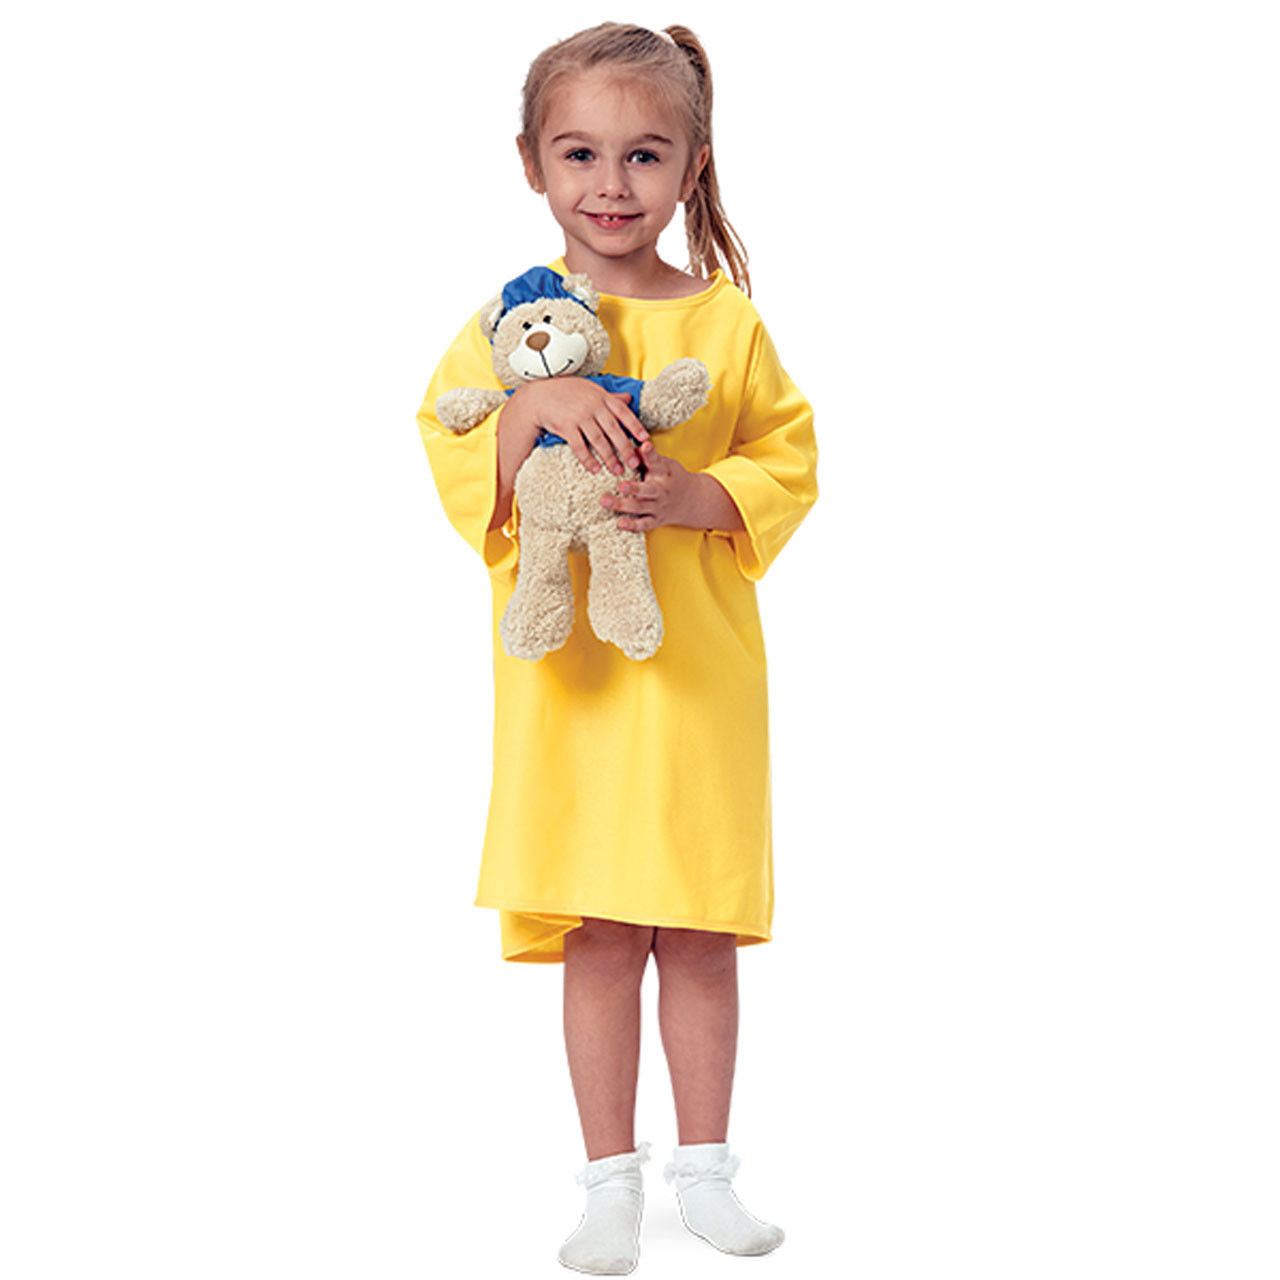 Are these yellow gowns suitable for extended hospital stays?